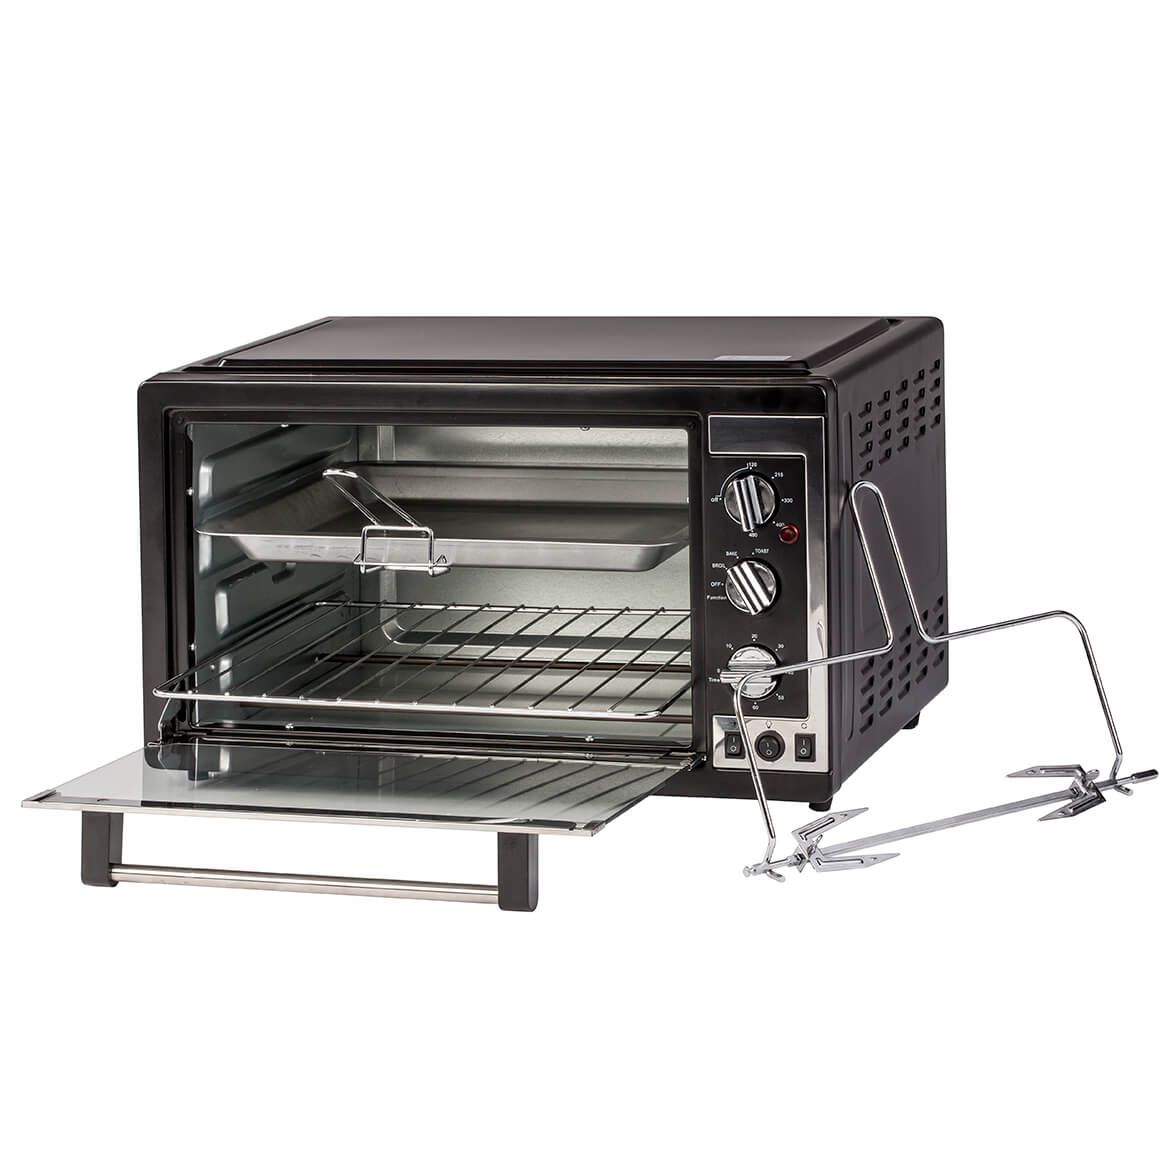 Multi - Use Convection Oven by Home Market Place     XL + '-' + 366328